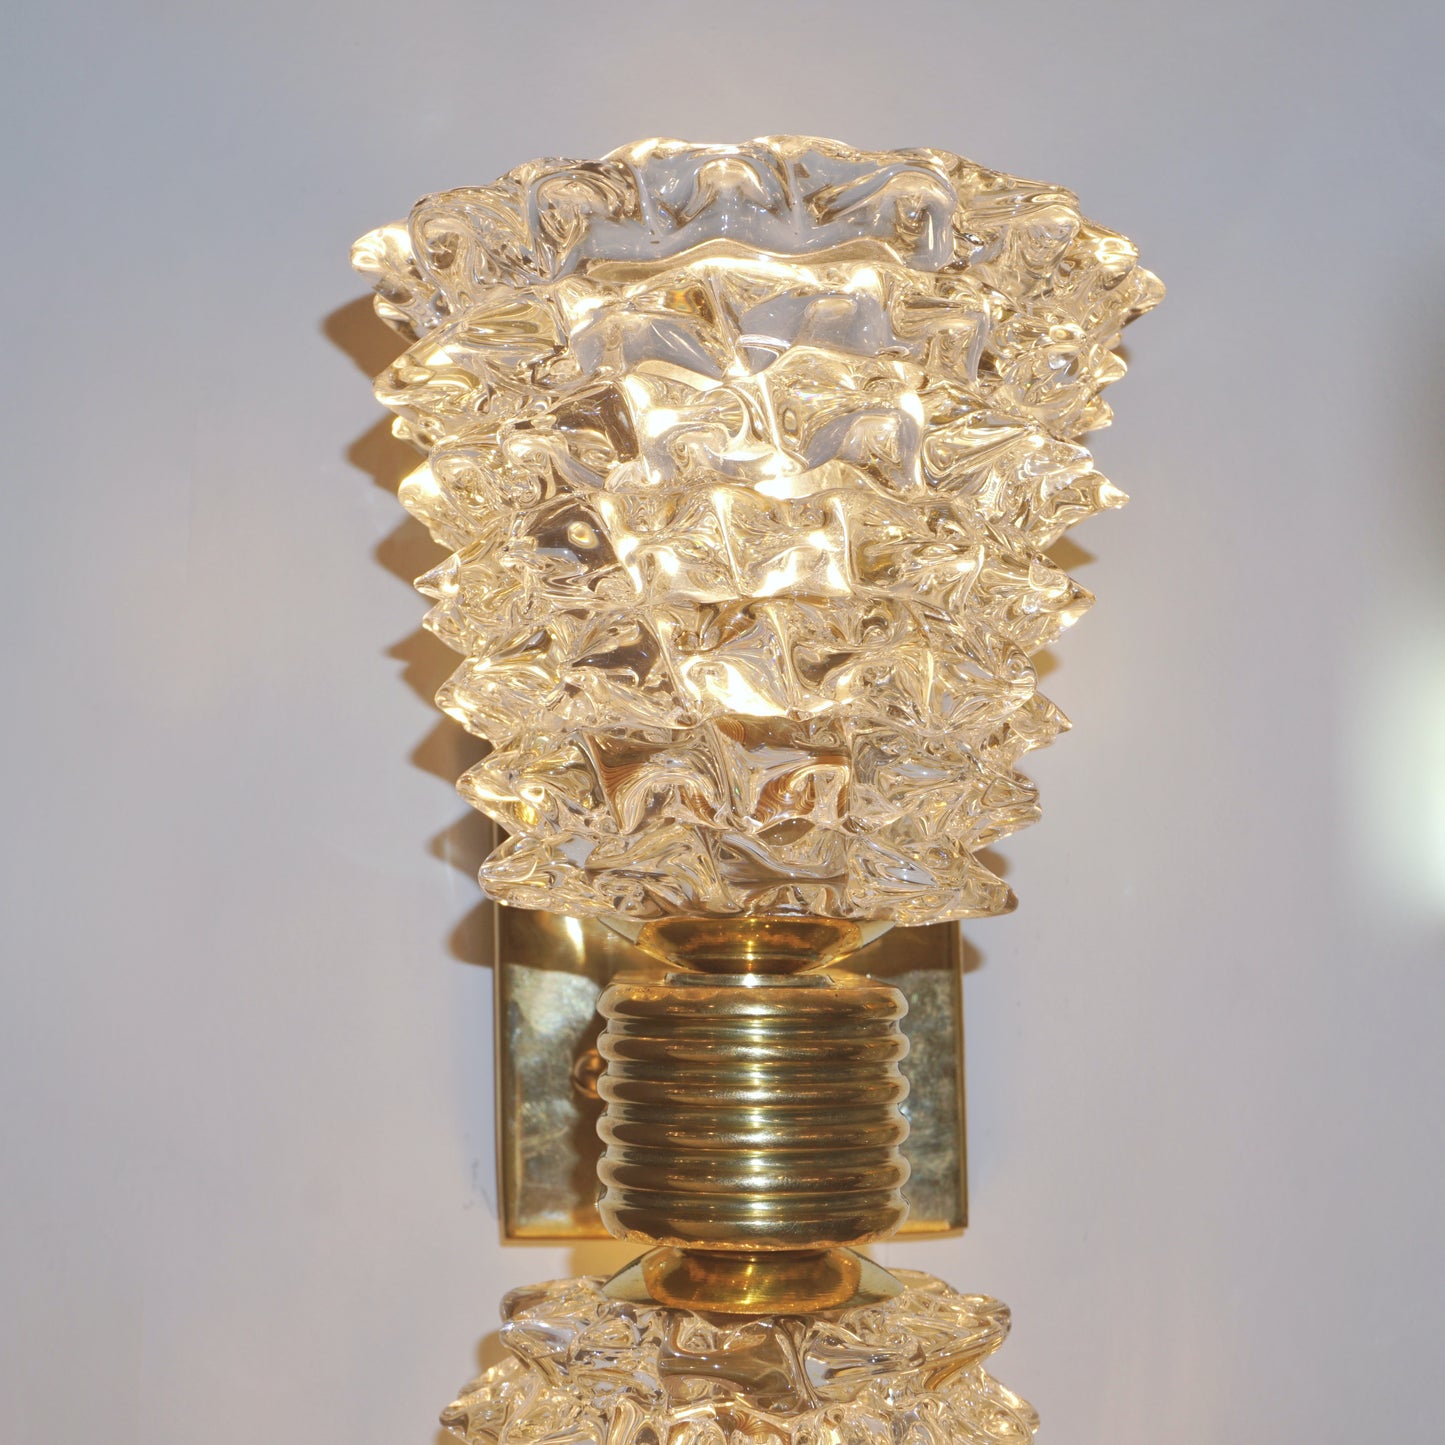 Contemporary Italian Rostrato Crystal Murano Glass & Brass Double-Lit Sconce